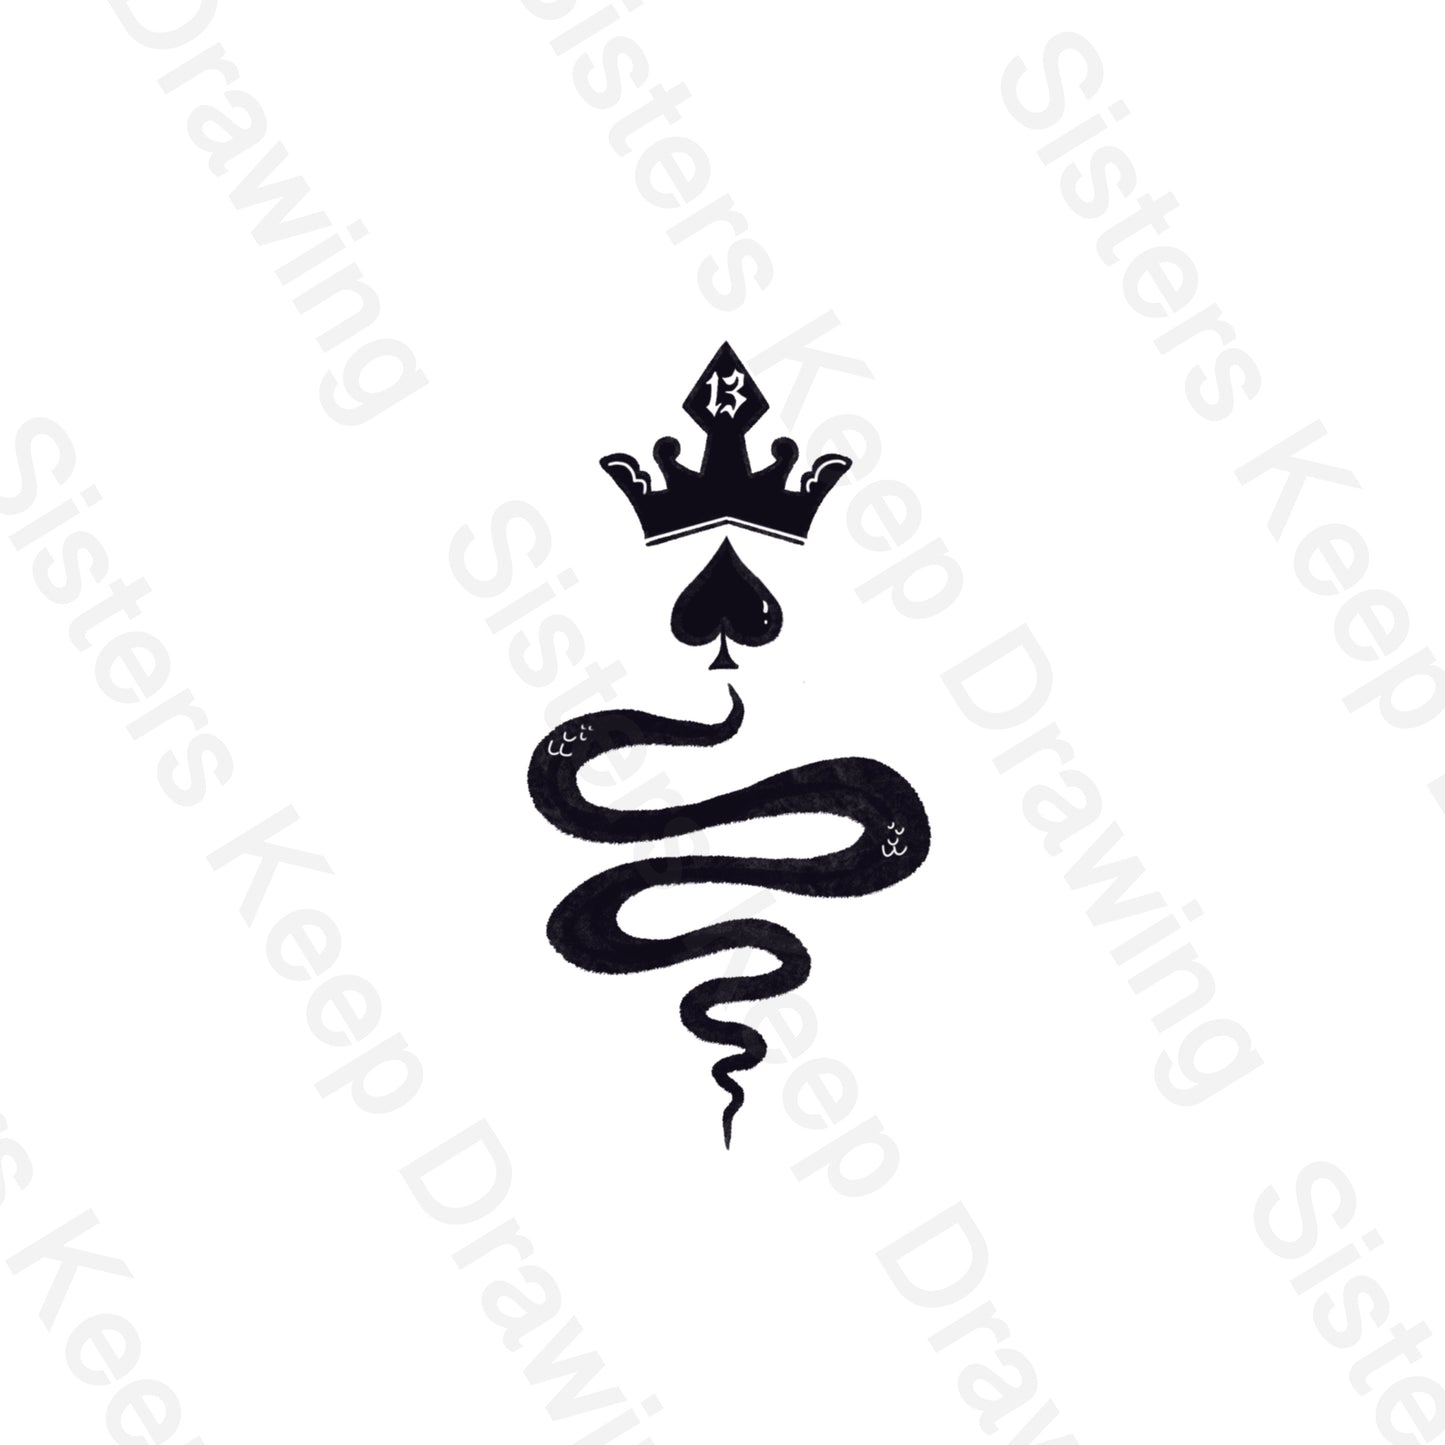 Crown snake -Taylor Swift Inspired tattoo - Tattoo Transparent Permission Pto